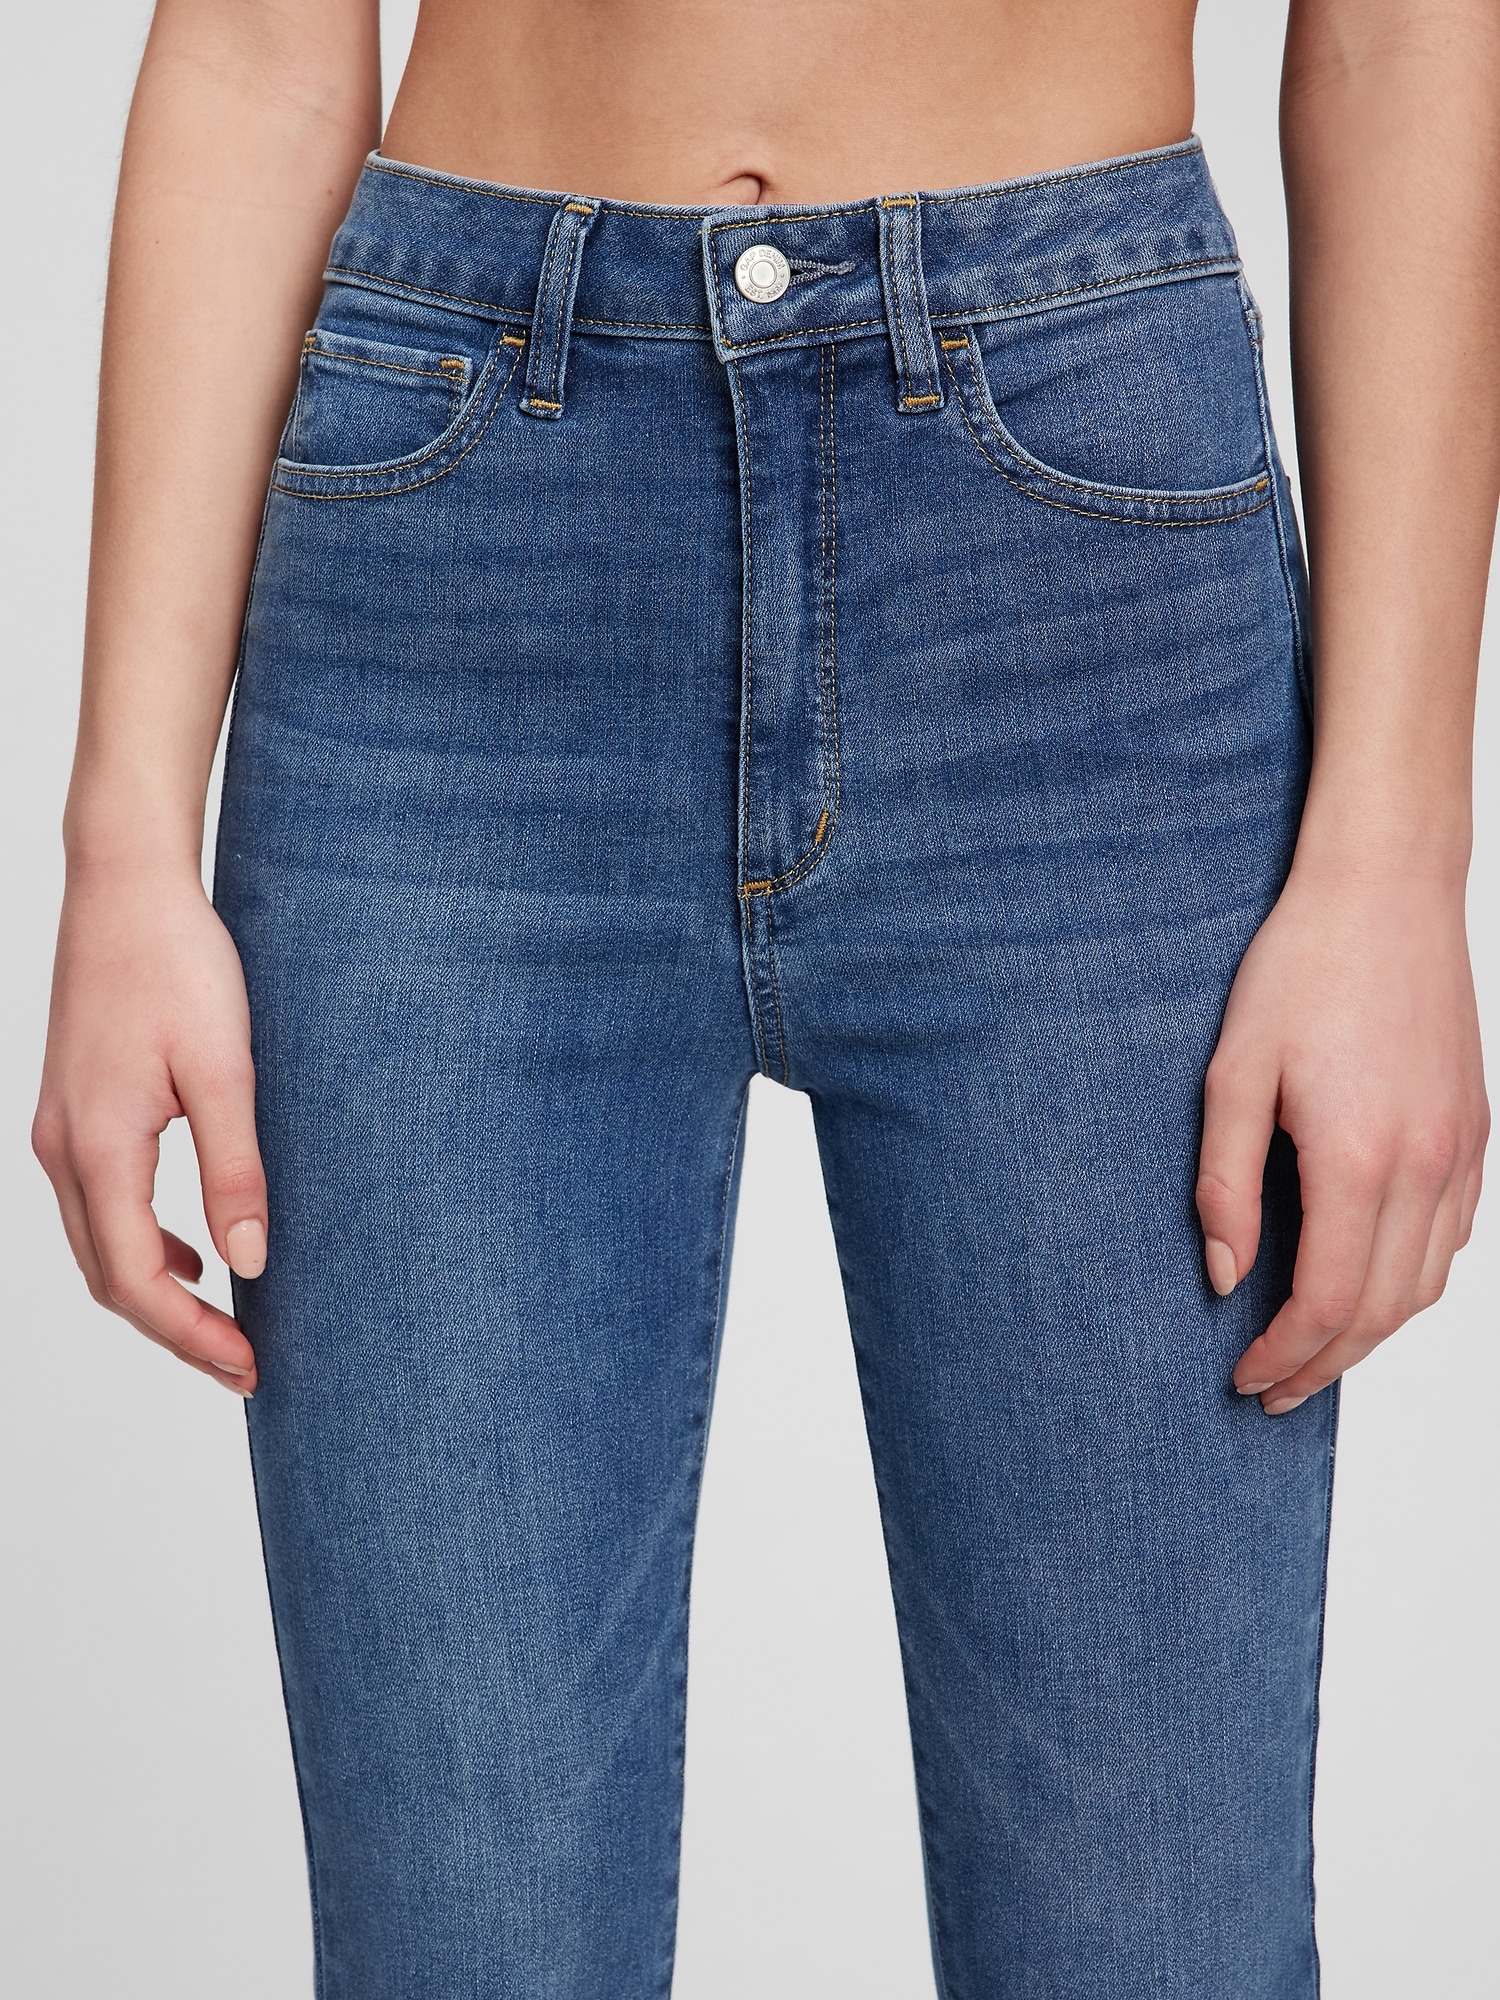 Gap High Rise Universal Jegging with Secret Smoothing Pockets